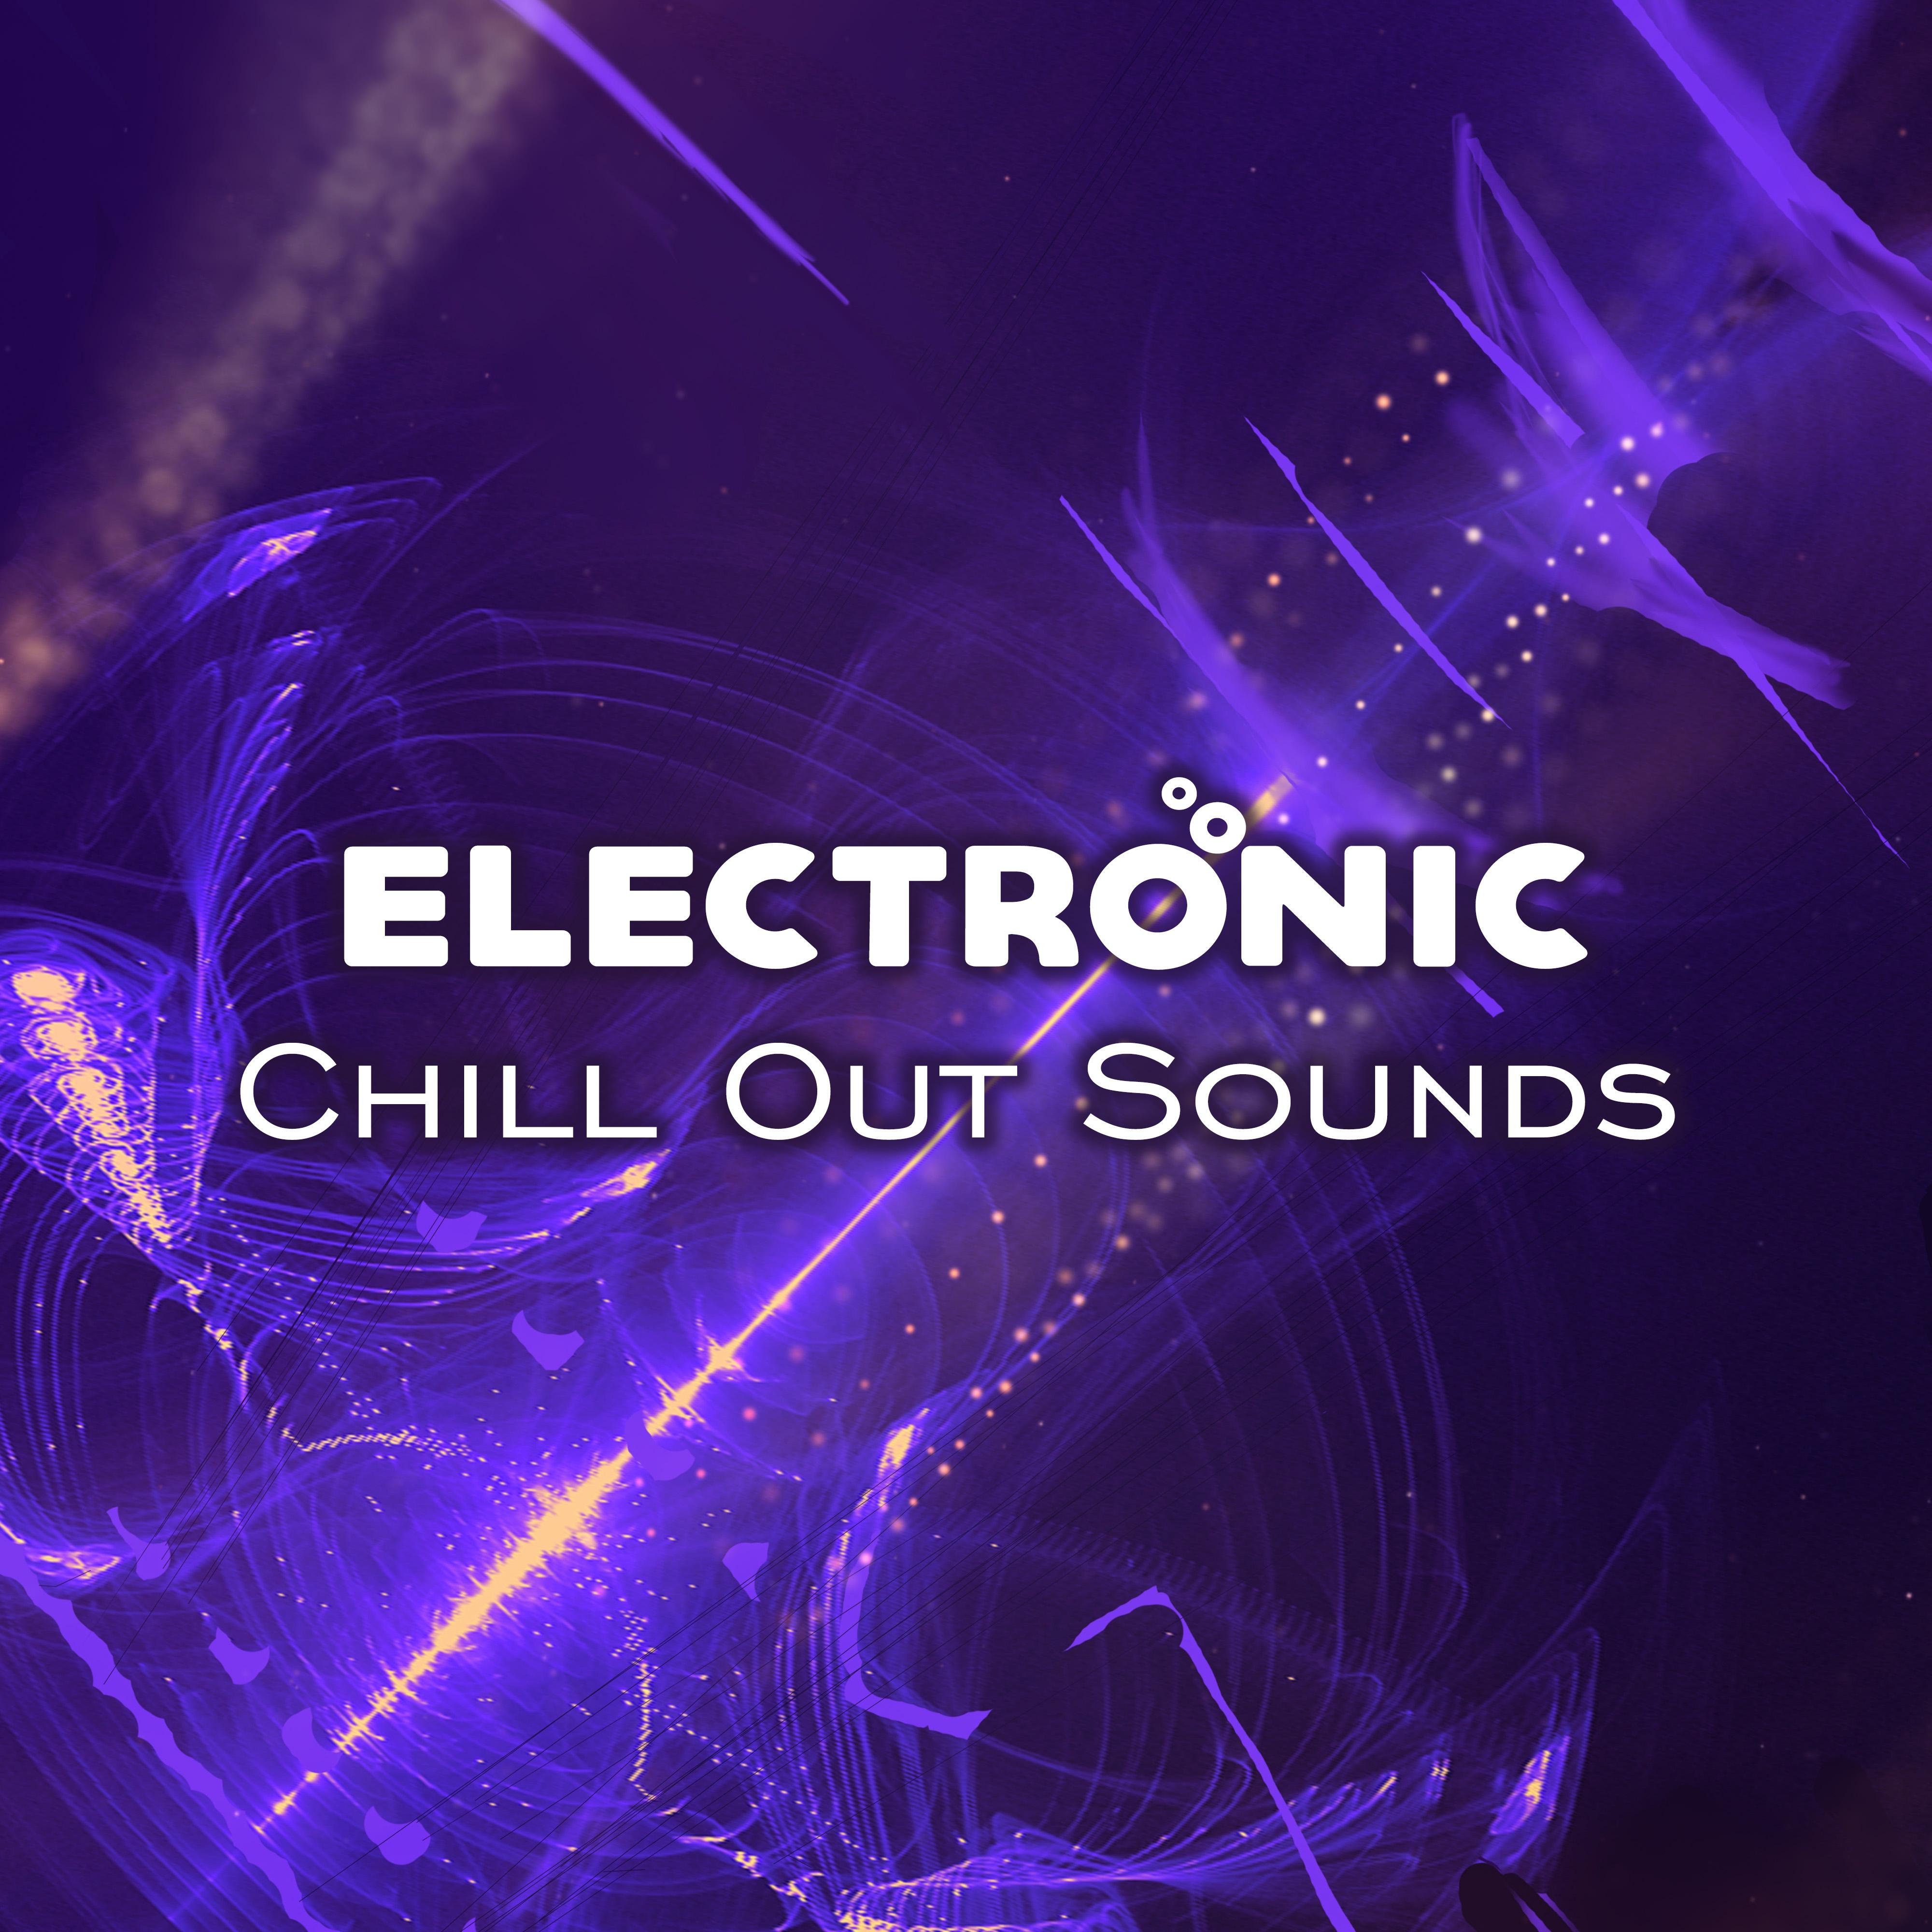 Electronic Chill Out Sounds – Best Chill Out Music for Party, Easy Listening, Colorful Drinks, Sounds to Have Fun